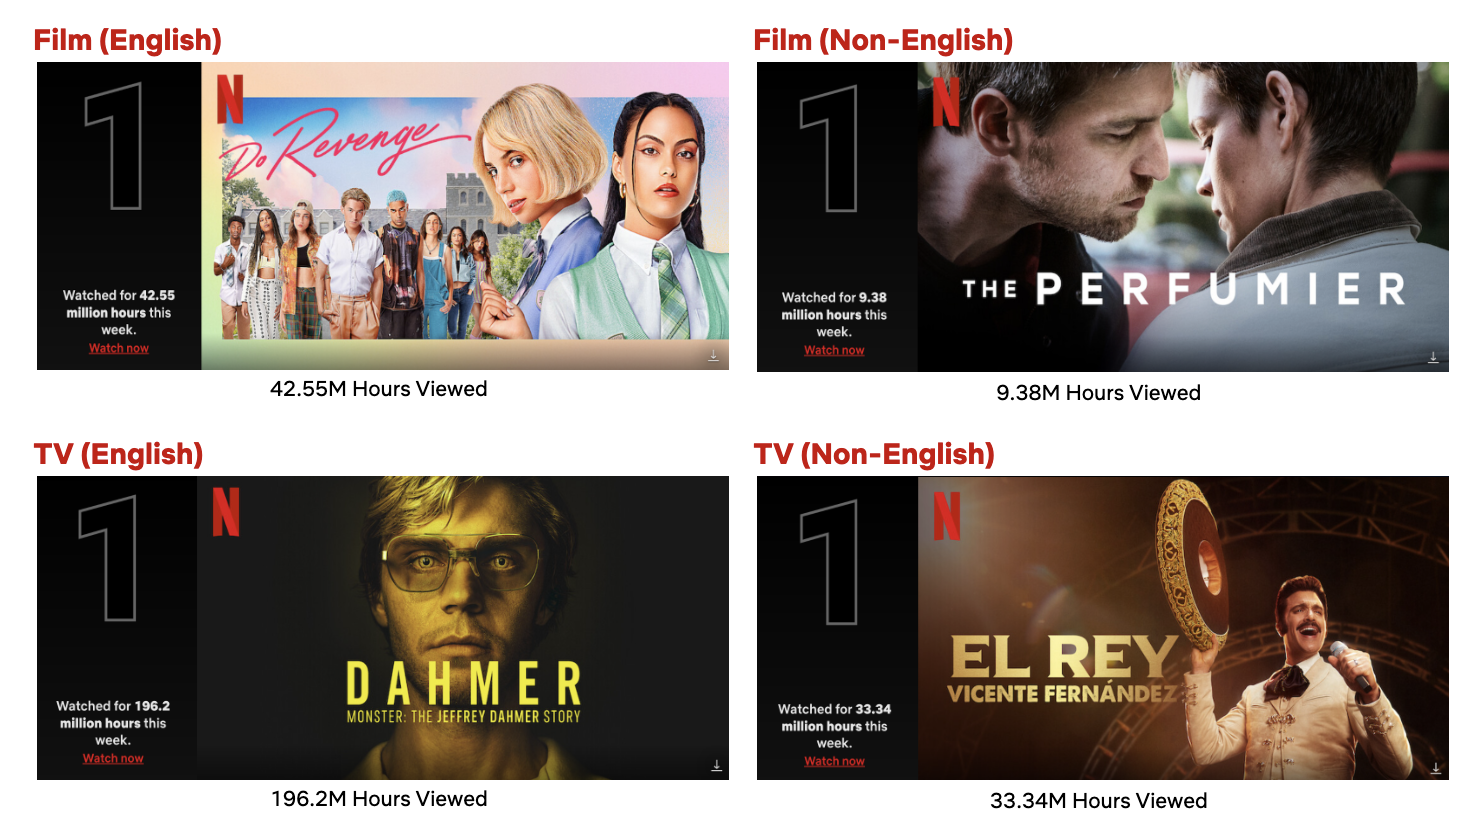 Top 10 Week of September 19: ‘DAHMER - Monster’ is the Most Viewed Title This Week;  ‘Do Revenge’ Slays the English Films List   